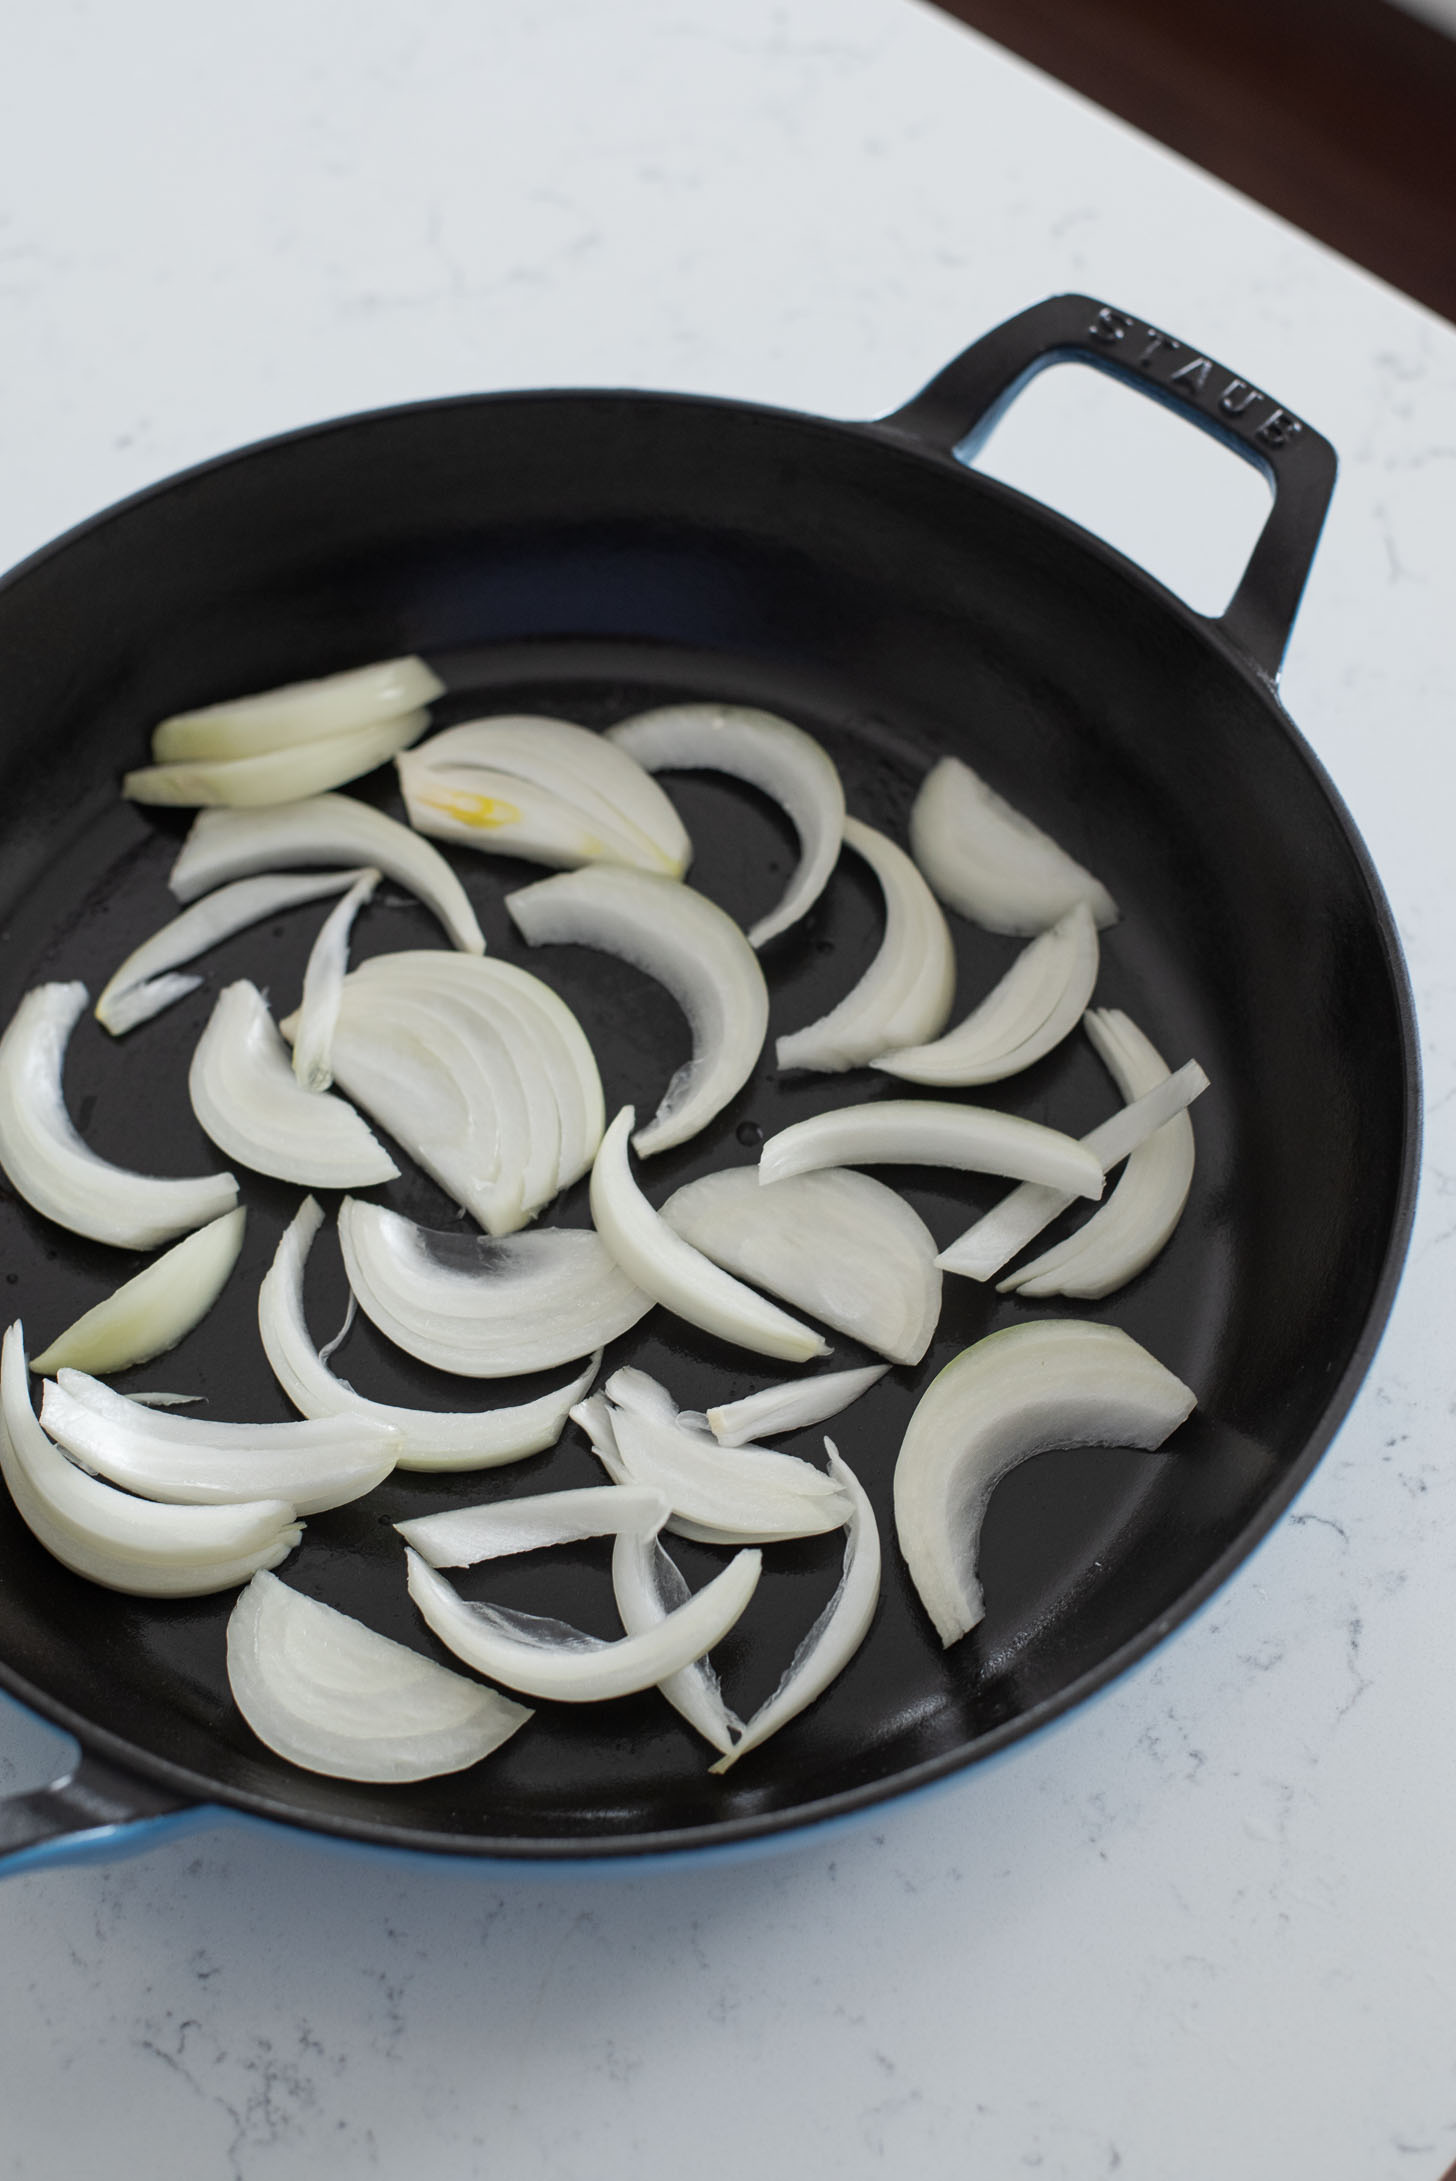 Onion slices are laid on the bottom of pan to make budae jjigae.